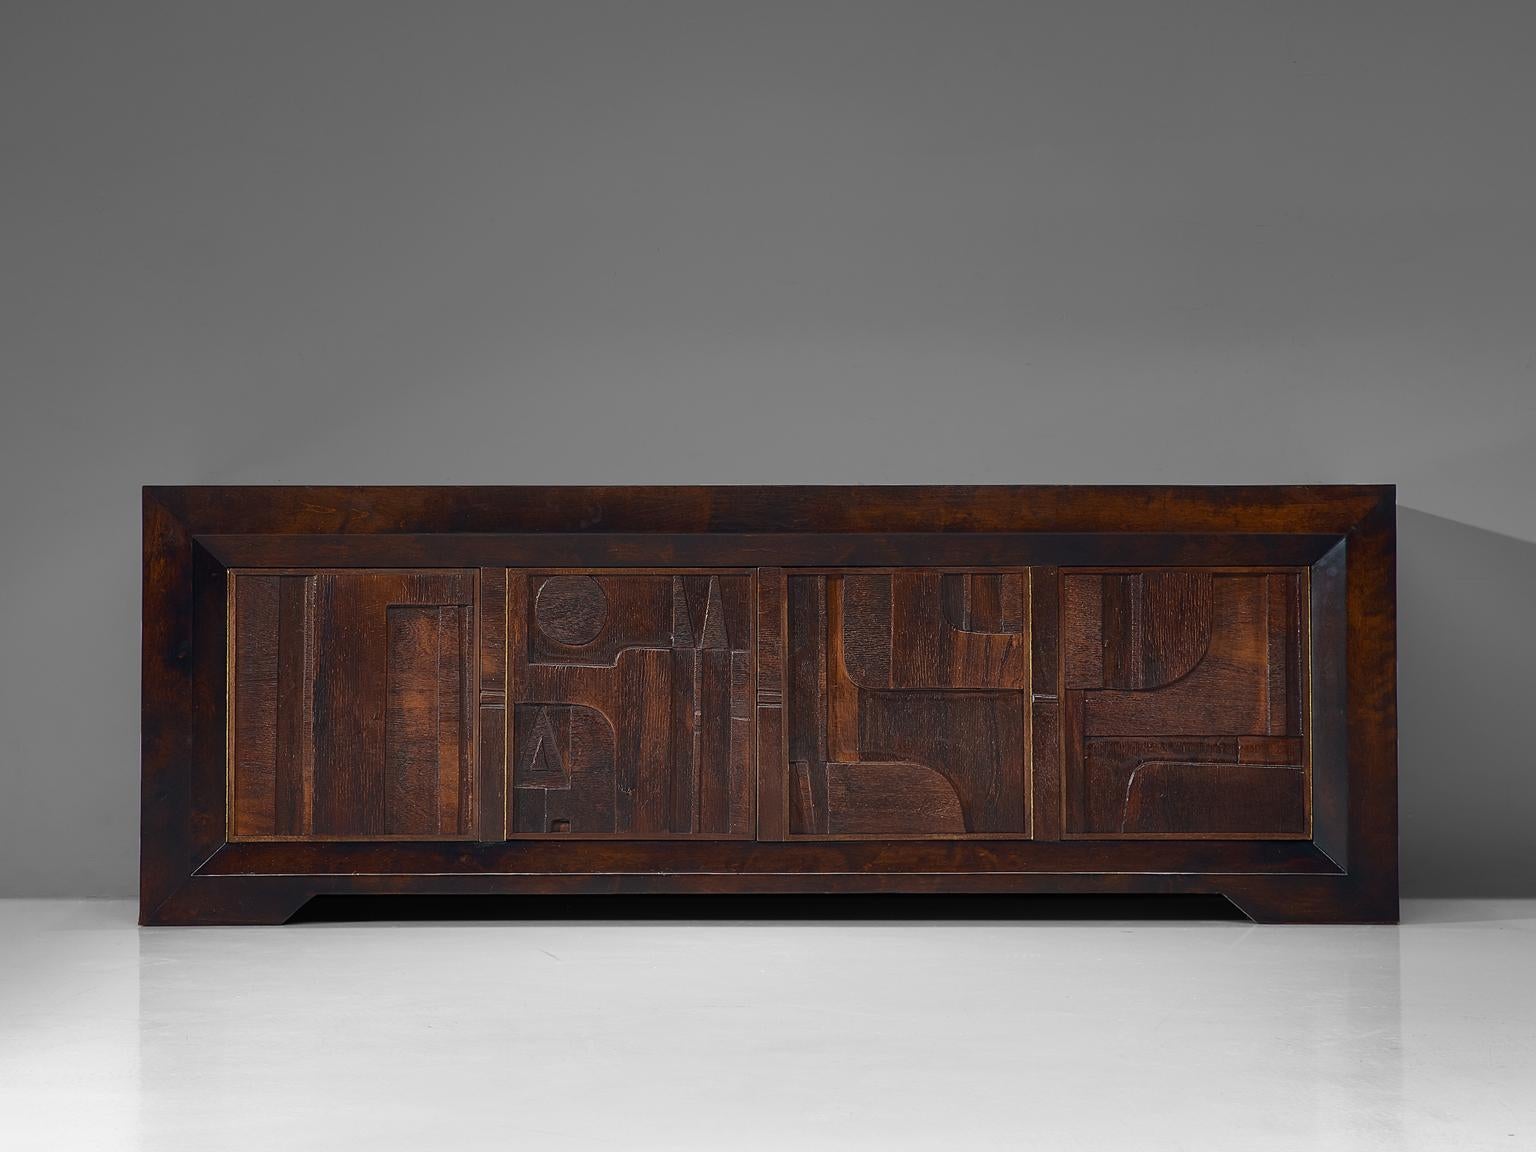 Nerone and Patuzzi for Gruppo NP2, sculptural sideboard, wood and glass, Italy, 1970s.

This rare and exceptional wooden sculptural sideboard is designed by Nerone and Patuzzi for Gruppo NP2. The Abstract Constructivism sideboard features high